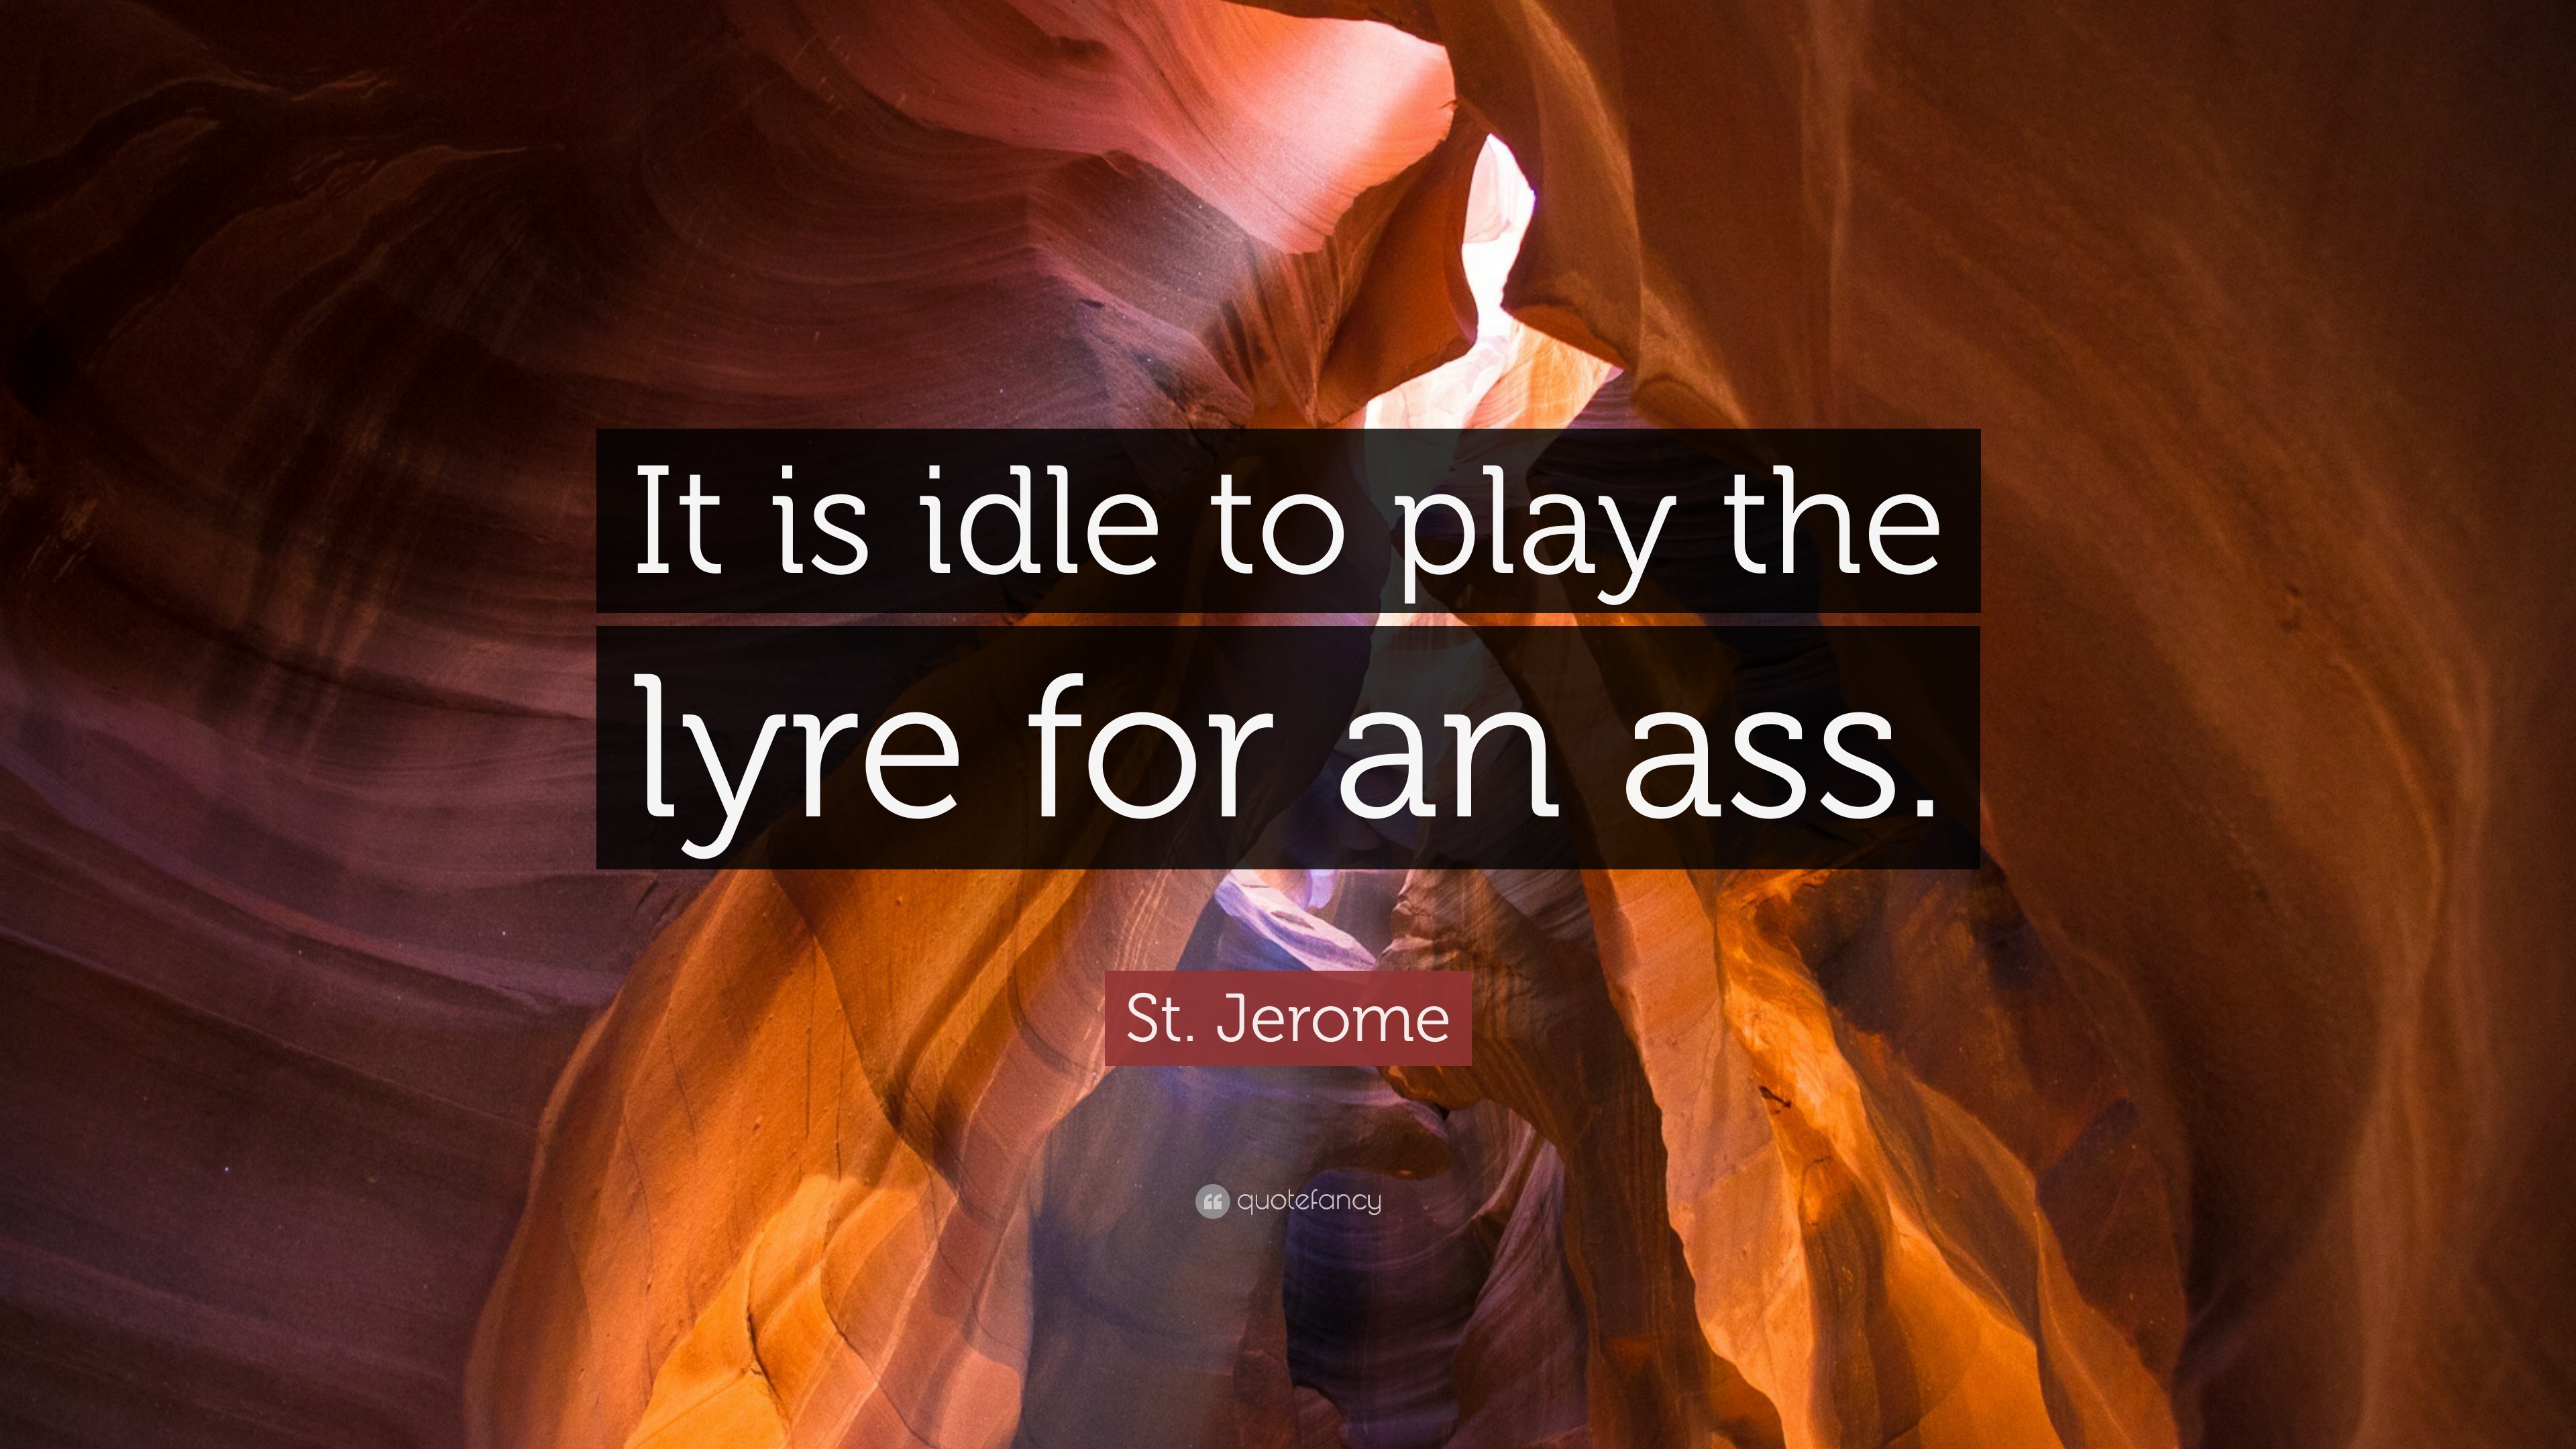 St. Jerome Quote: “It is idle to play the lyre for an ass.” 7